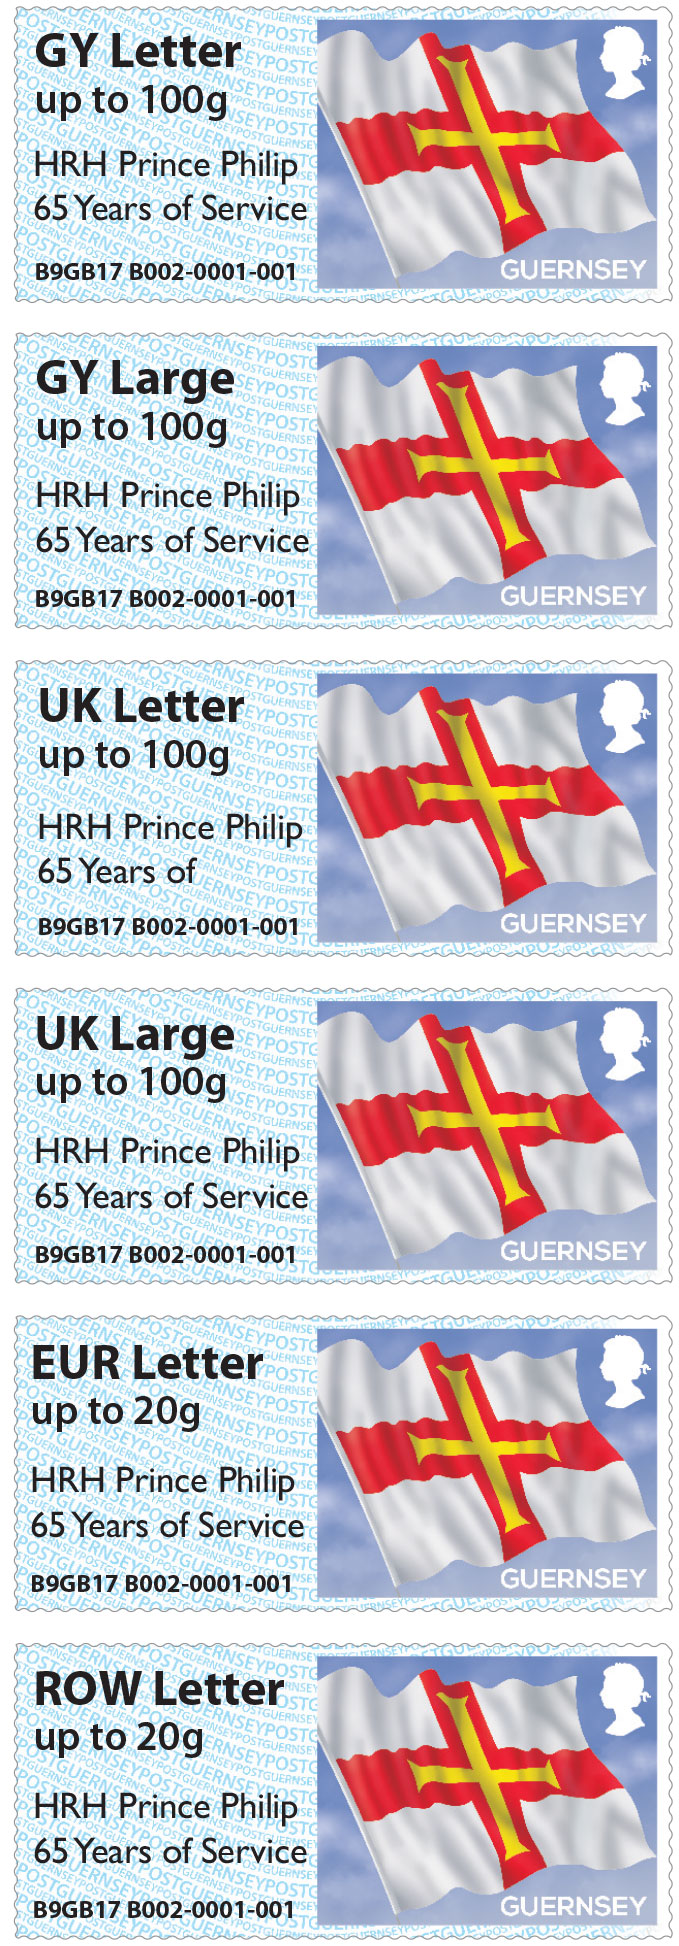 Royal Overprint for Guernsey's Post & Go at Autumn Stampex